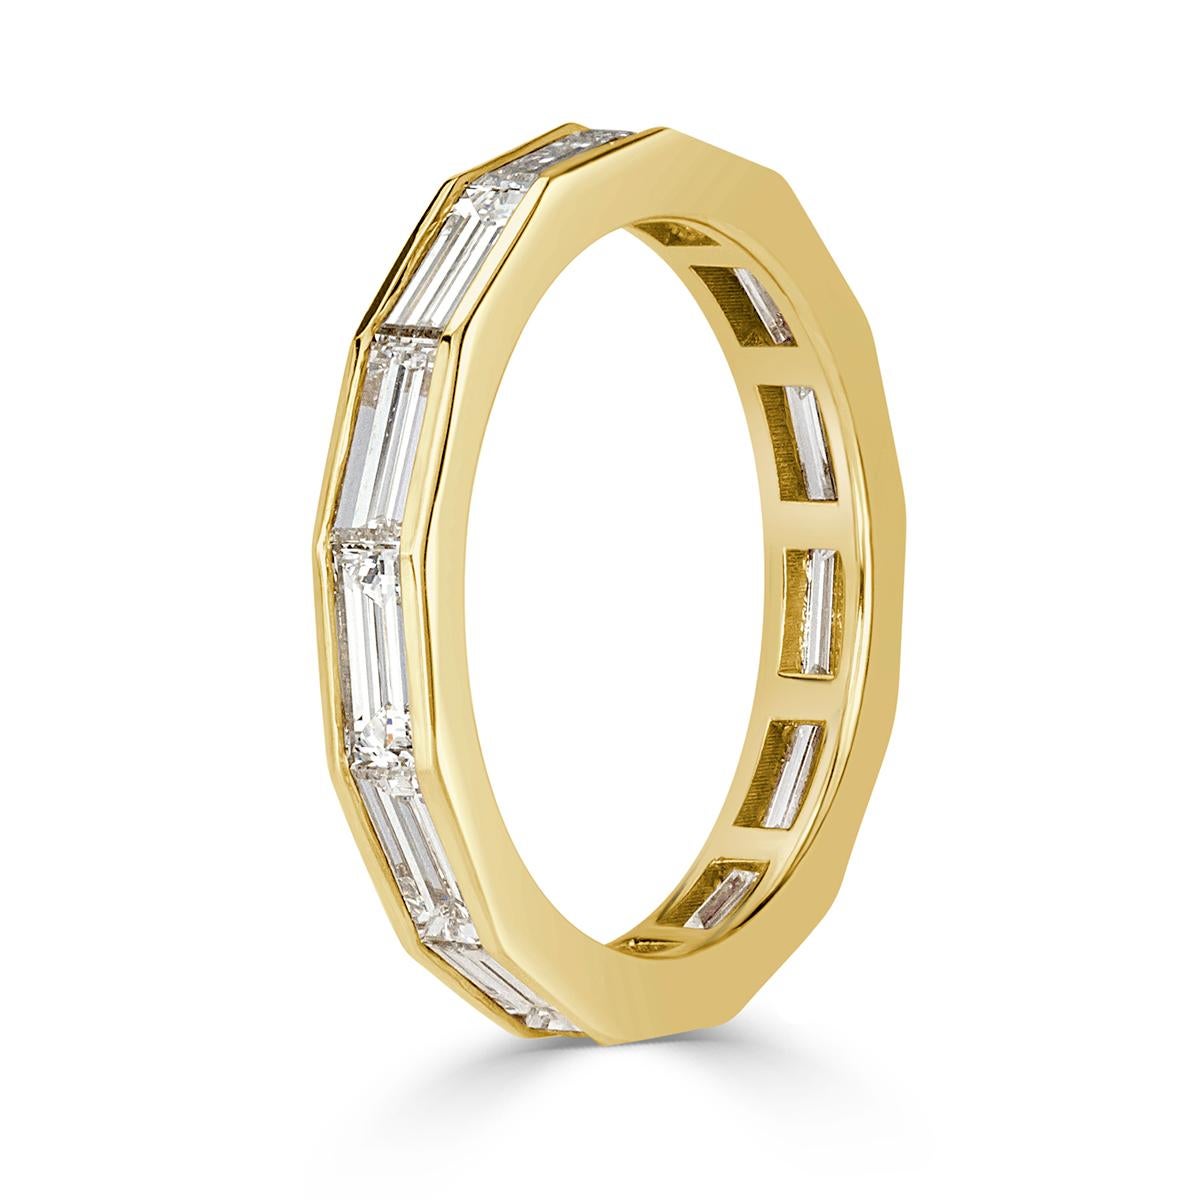 Designed in 18k yellow gold, this exquisite diamond eternity band showcases 2.05ct of baguette cut diamonds graded at E-F in color, VVS2-VS1 in clarity. All eternity bands are shown in a size 6.5. We custom craft each eternity band and will create